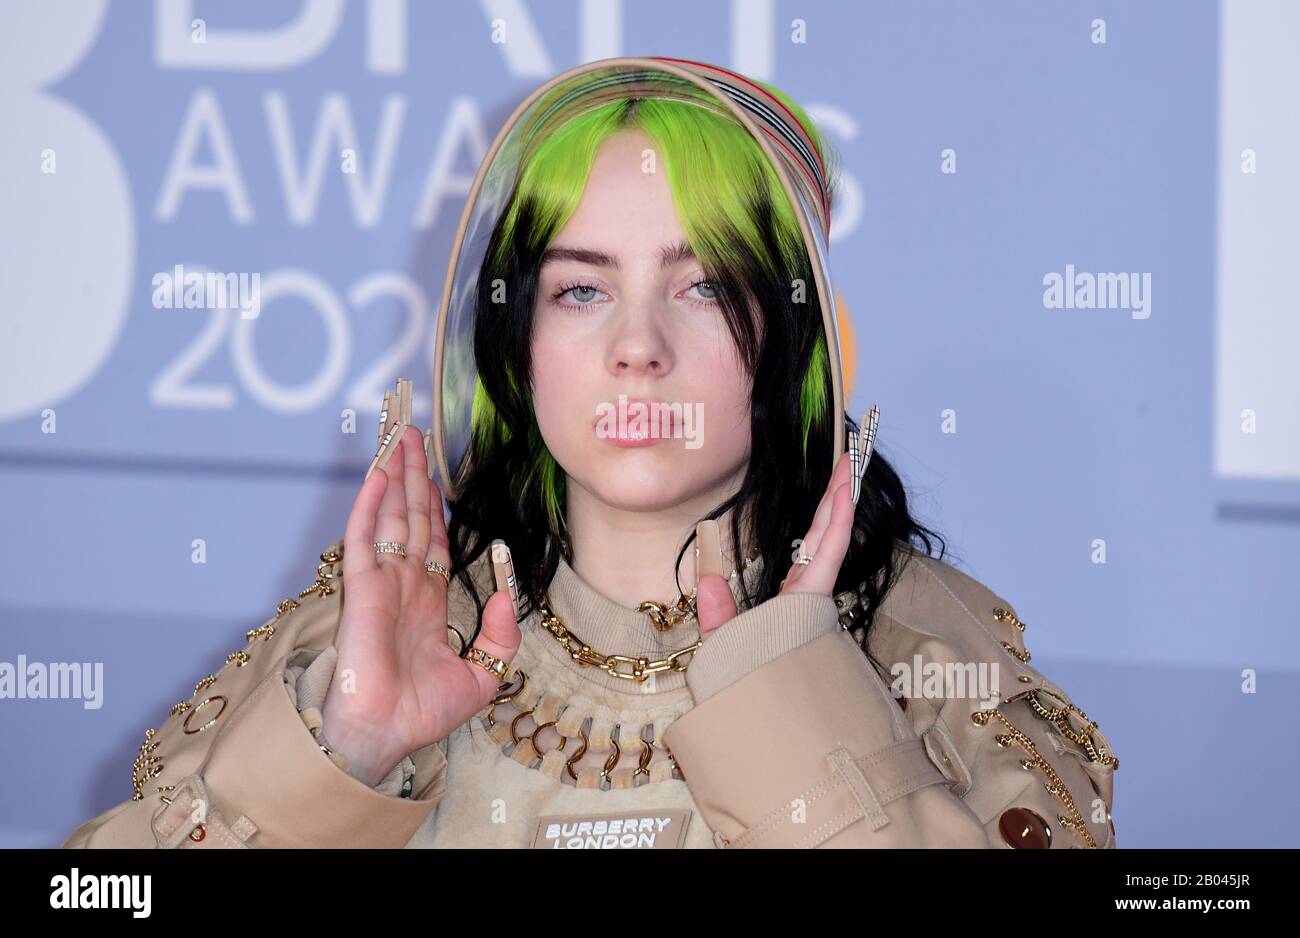 Billie Eilish arriving at the Brit Awards 2020 held at the O2 Arena, London. Stock Photo